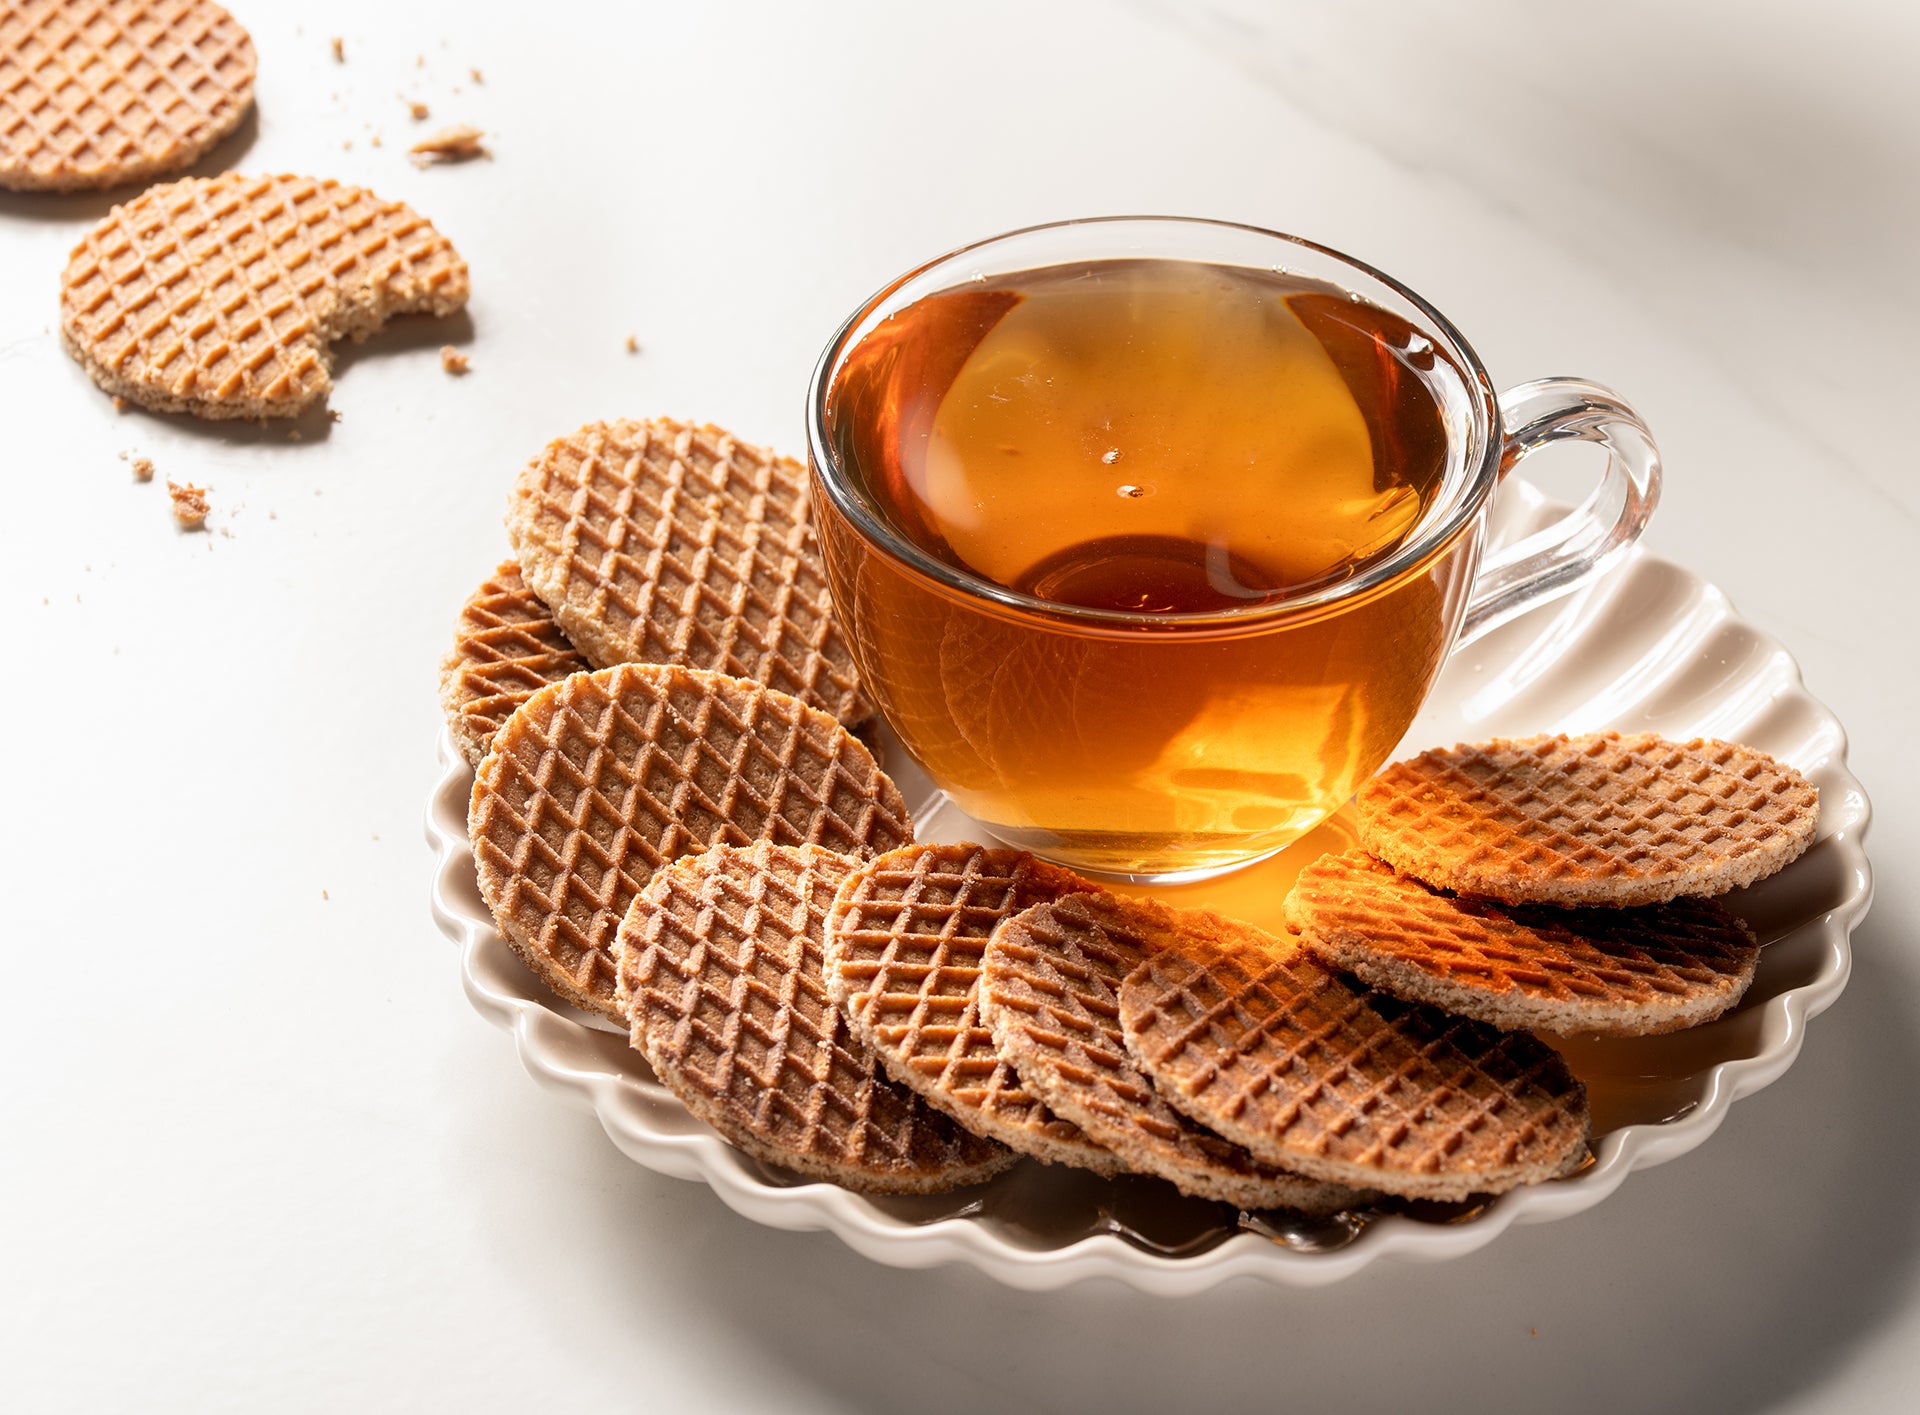 A cup of tea and Wonderen Stroopwafels 12 mini pack on a plate.